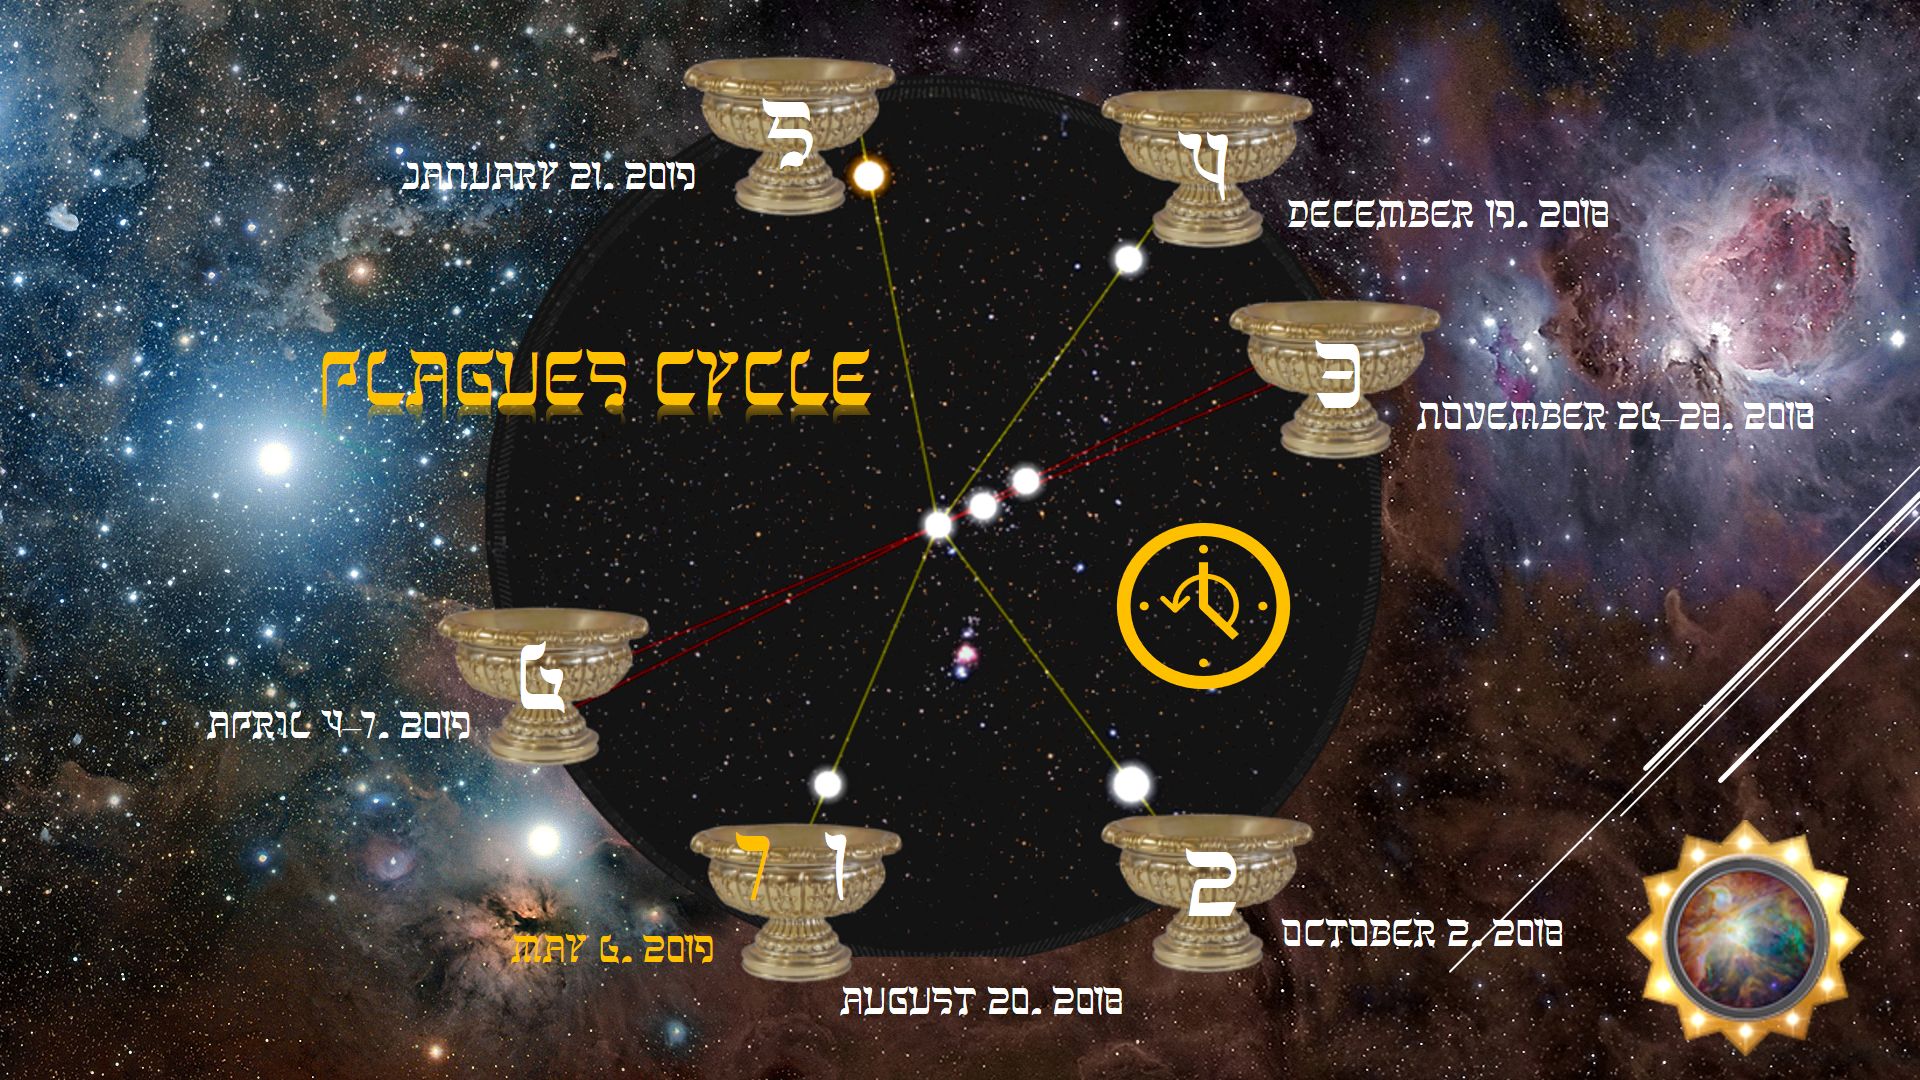 The Orion plagues cycle.